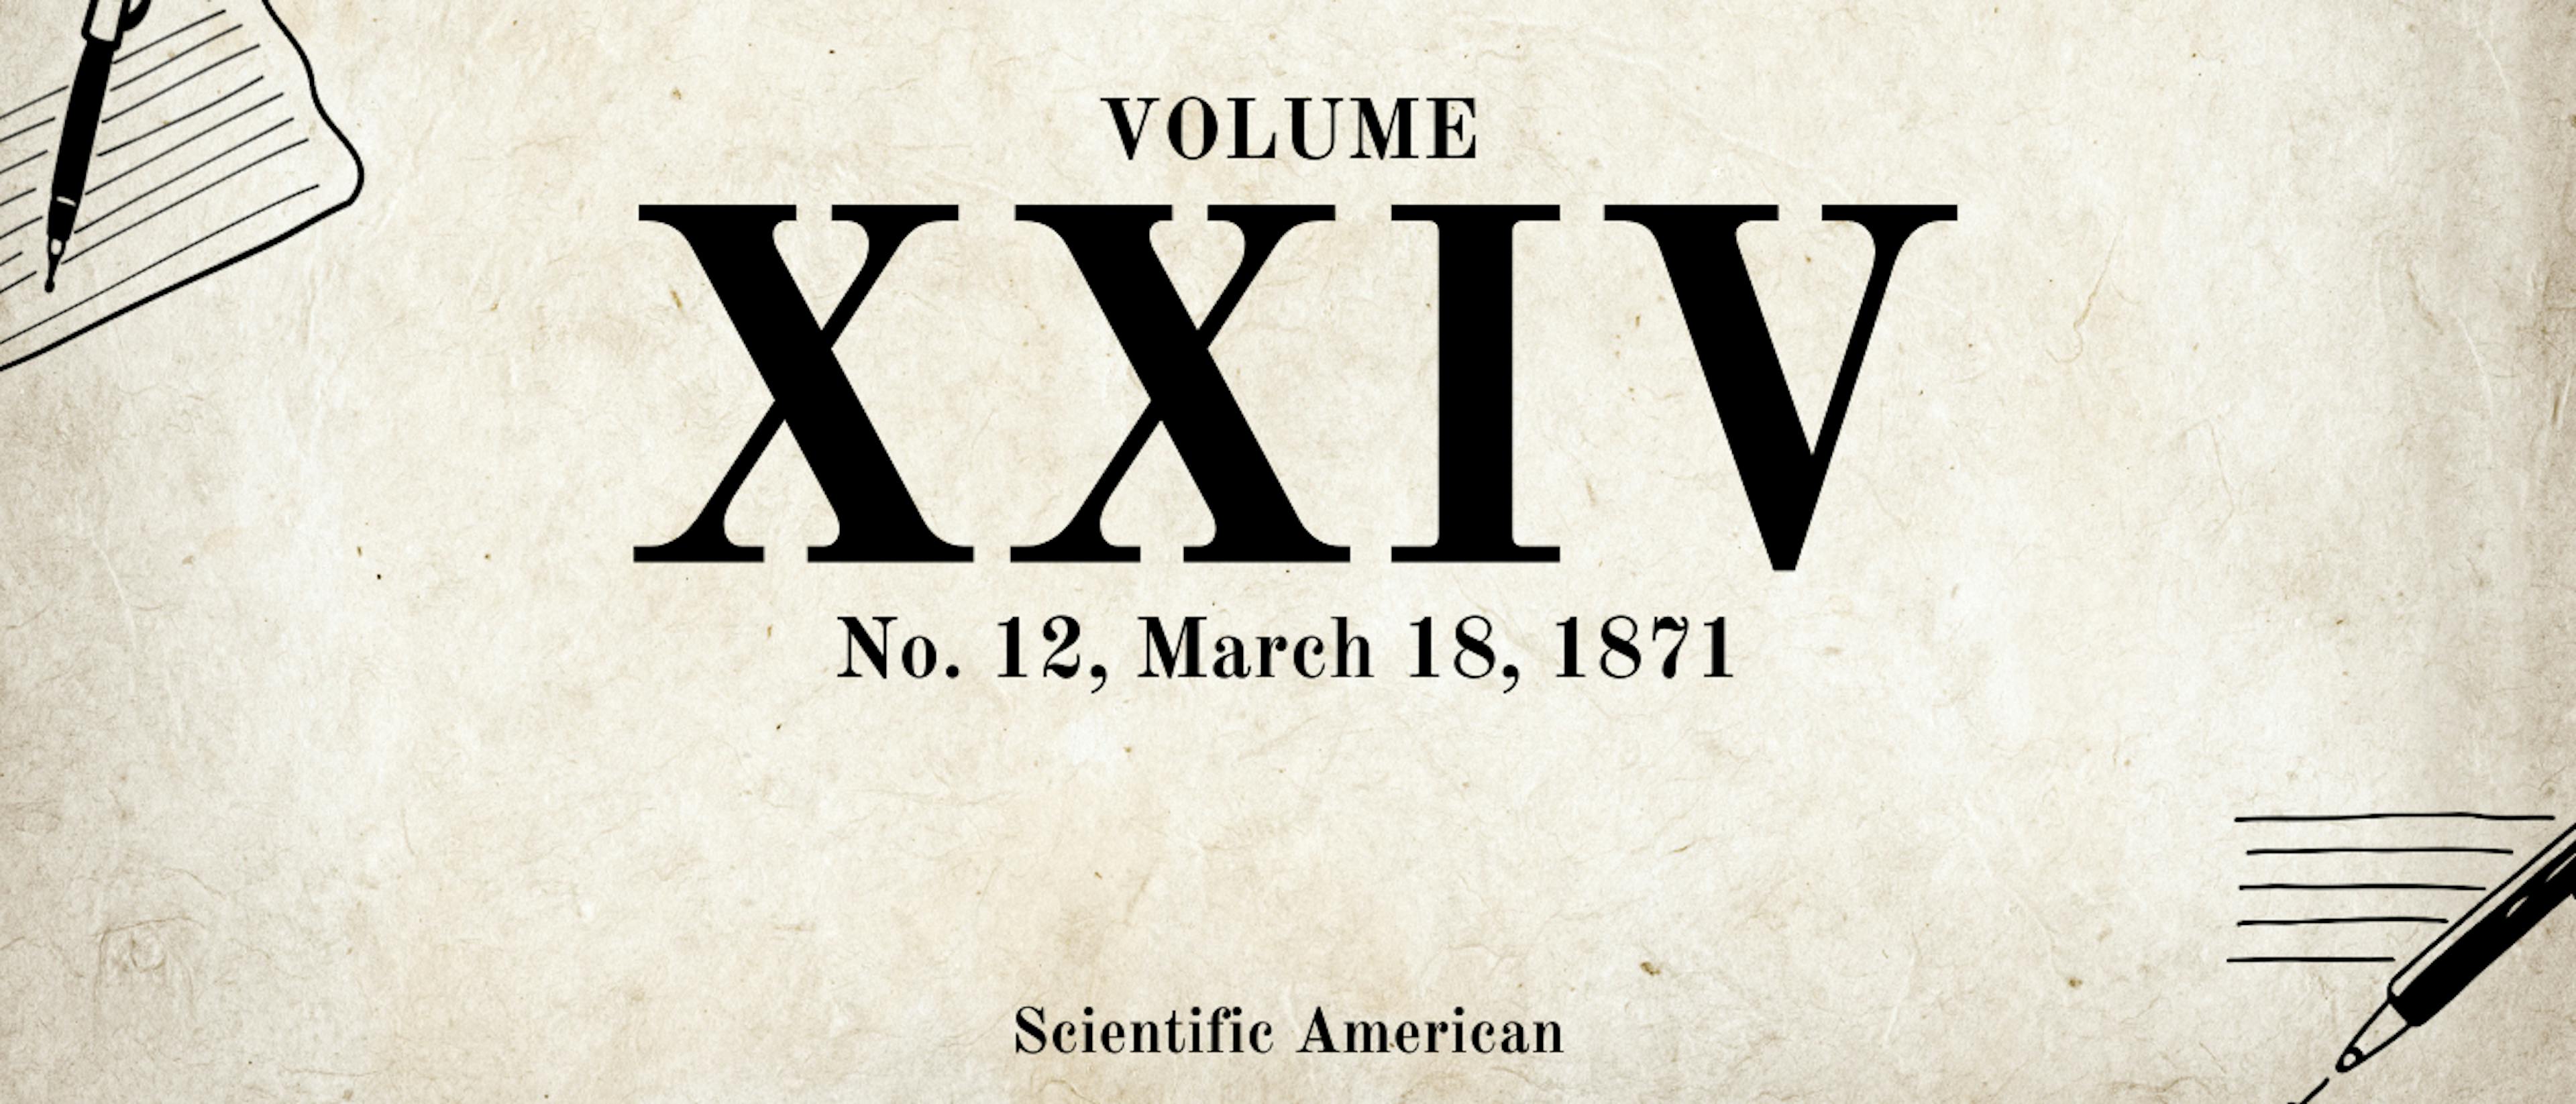 featured image - Scientific American, Volume XXIV., No. 12, March 18, 1871 by Various - Table of Links